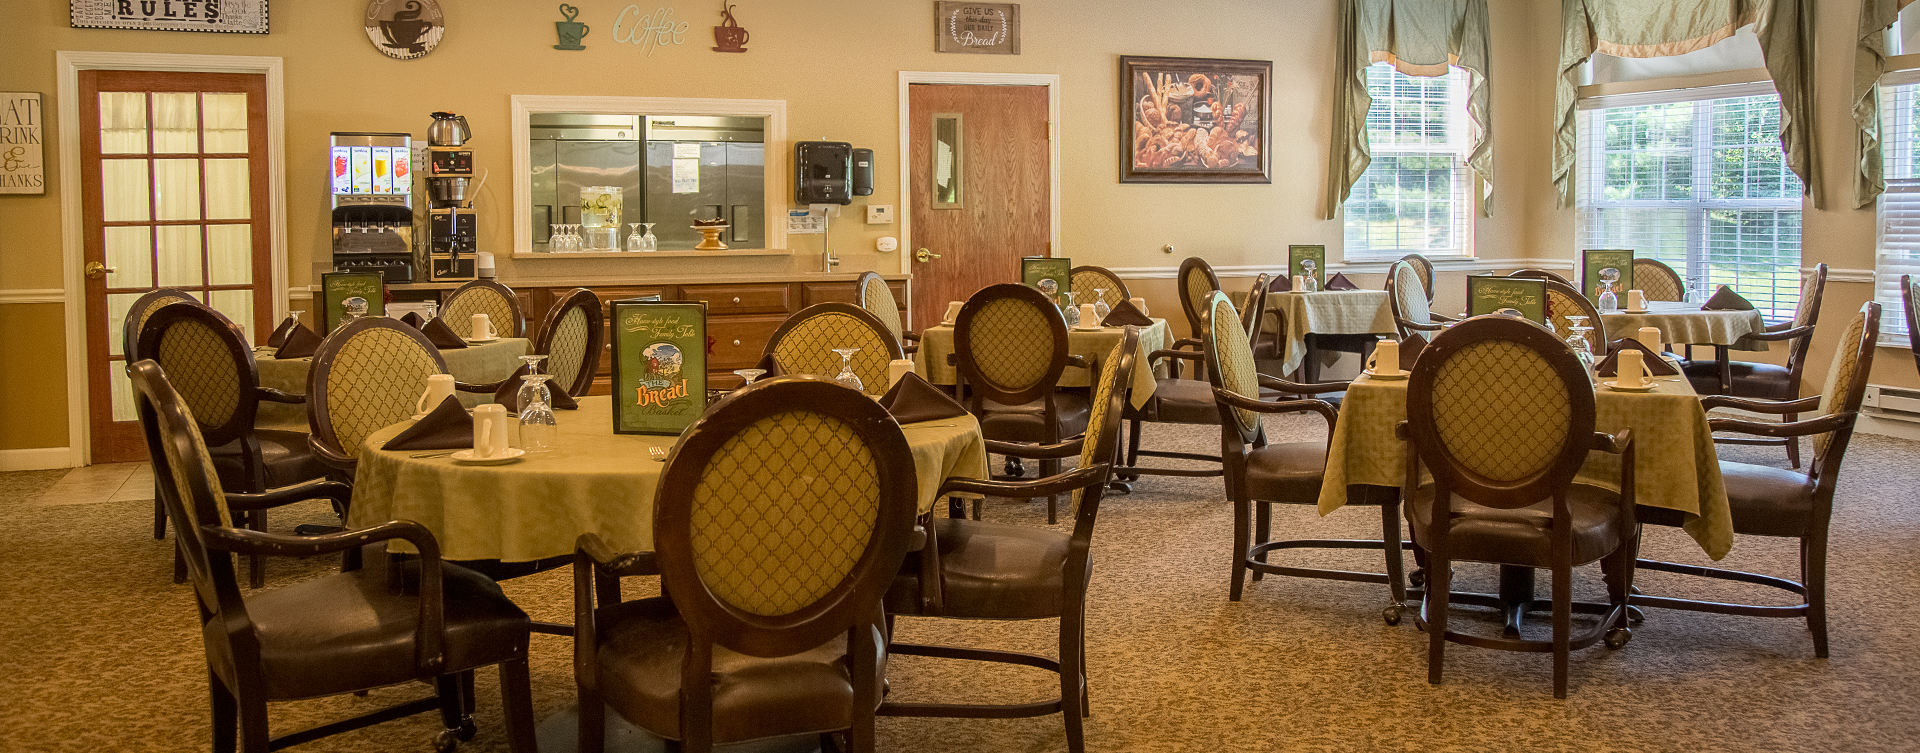 Enjoy restaurant -style meals served three times a day in our dining room at Bickford of Moline